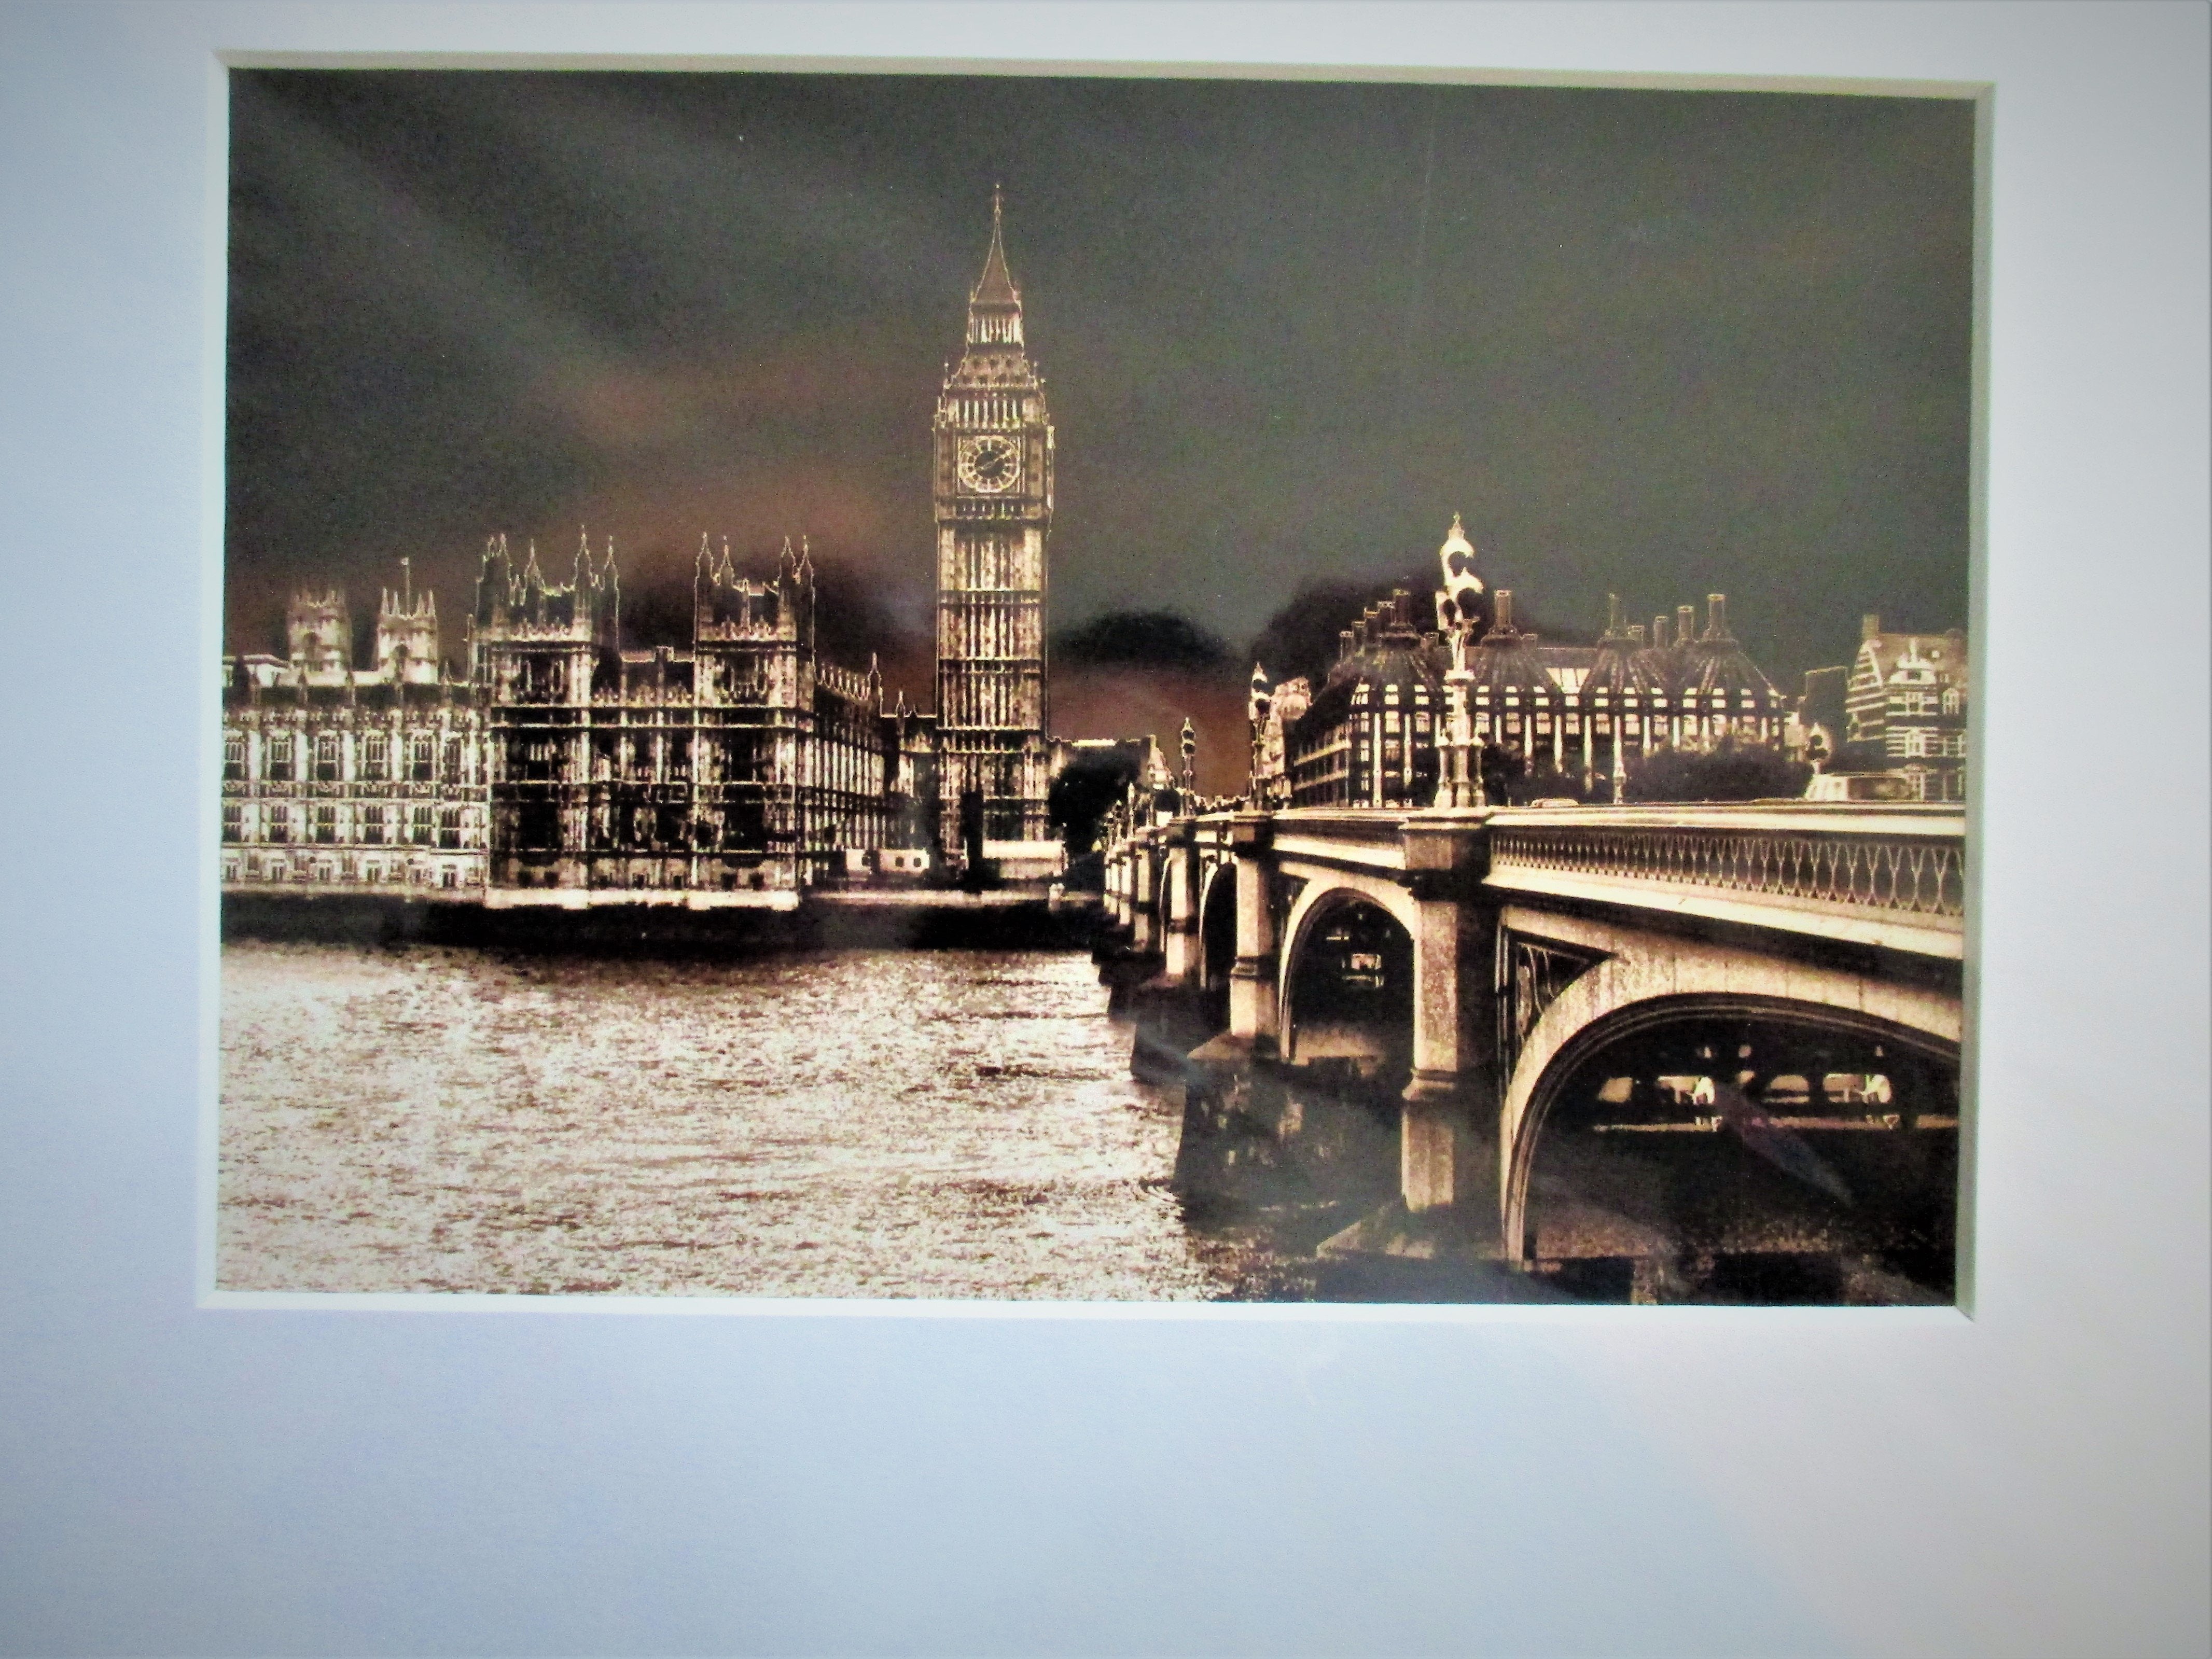 SET OF 6 ARTISTIC PHOTOS OF LONDON - London Art and Souvenirs